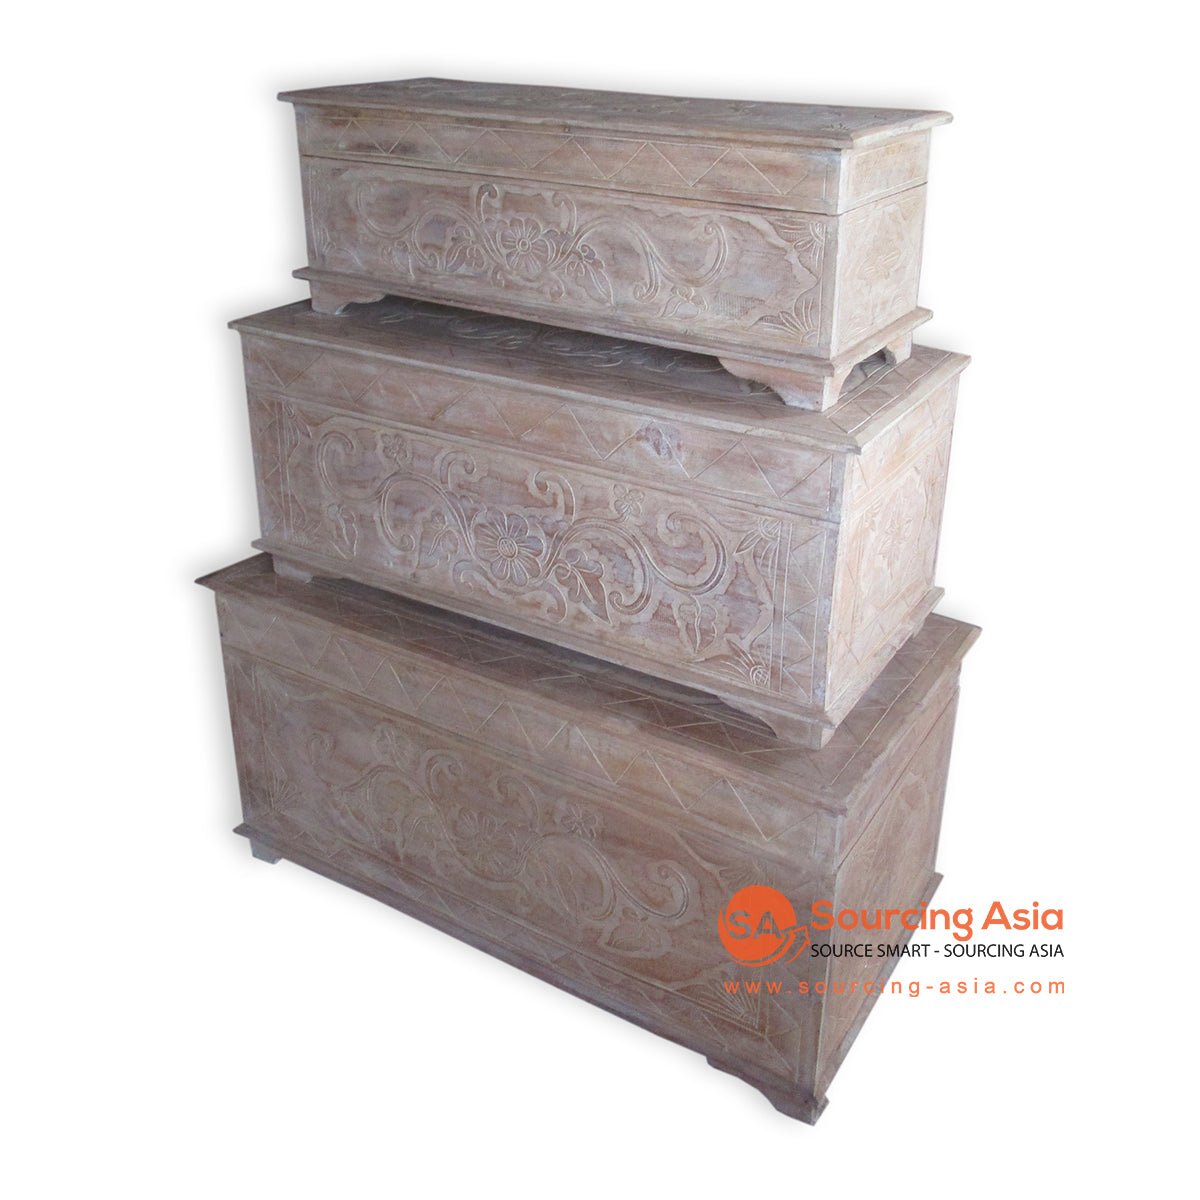 THE145BW-100 SET OF THREE BROWN WASH CARVED WOODEN BOXES